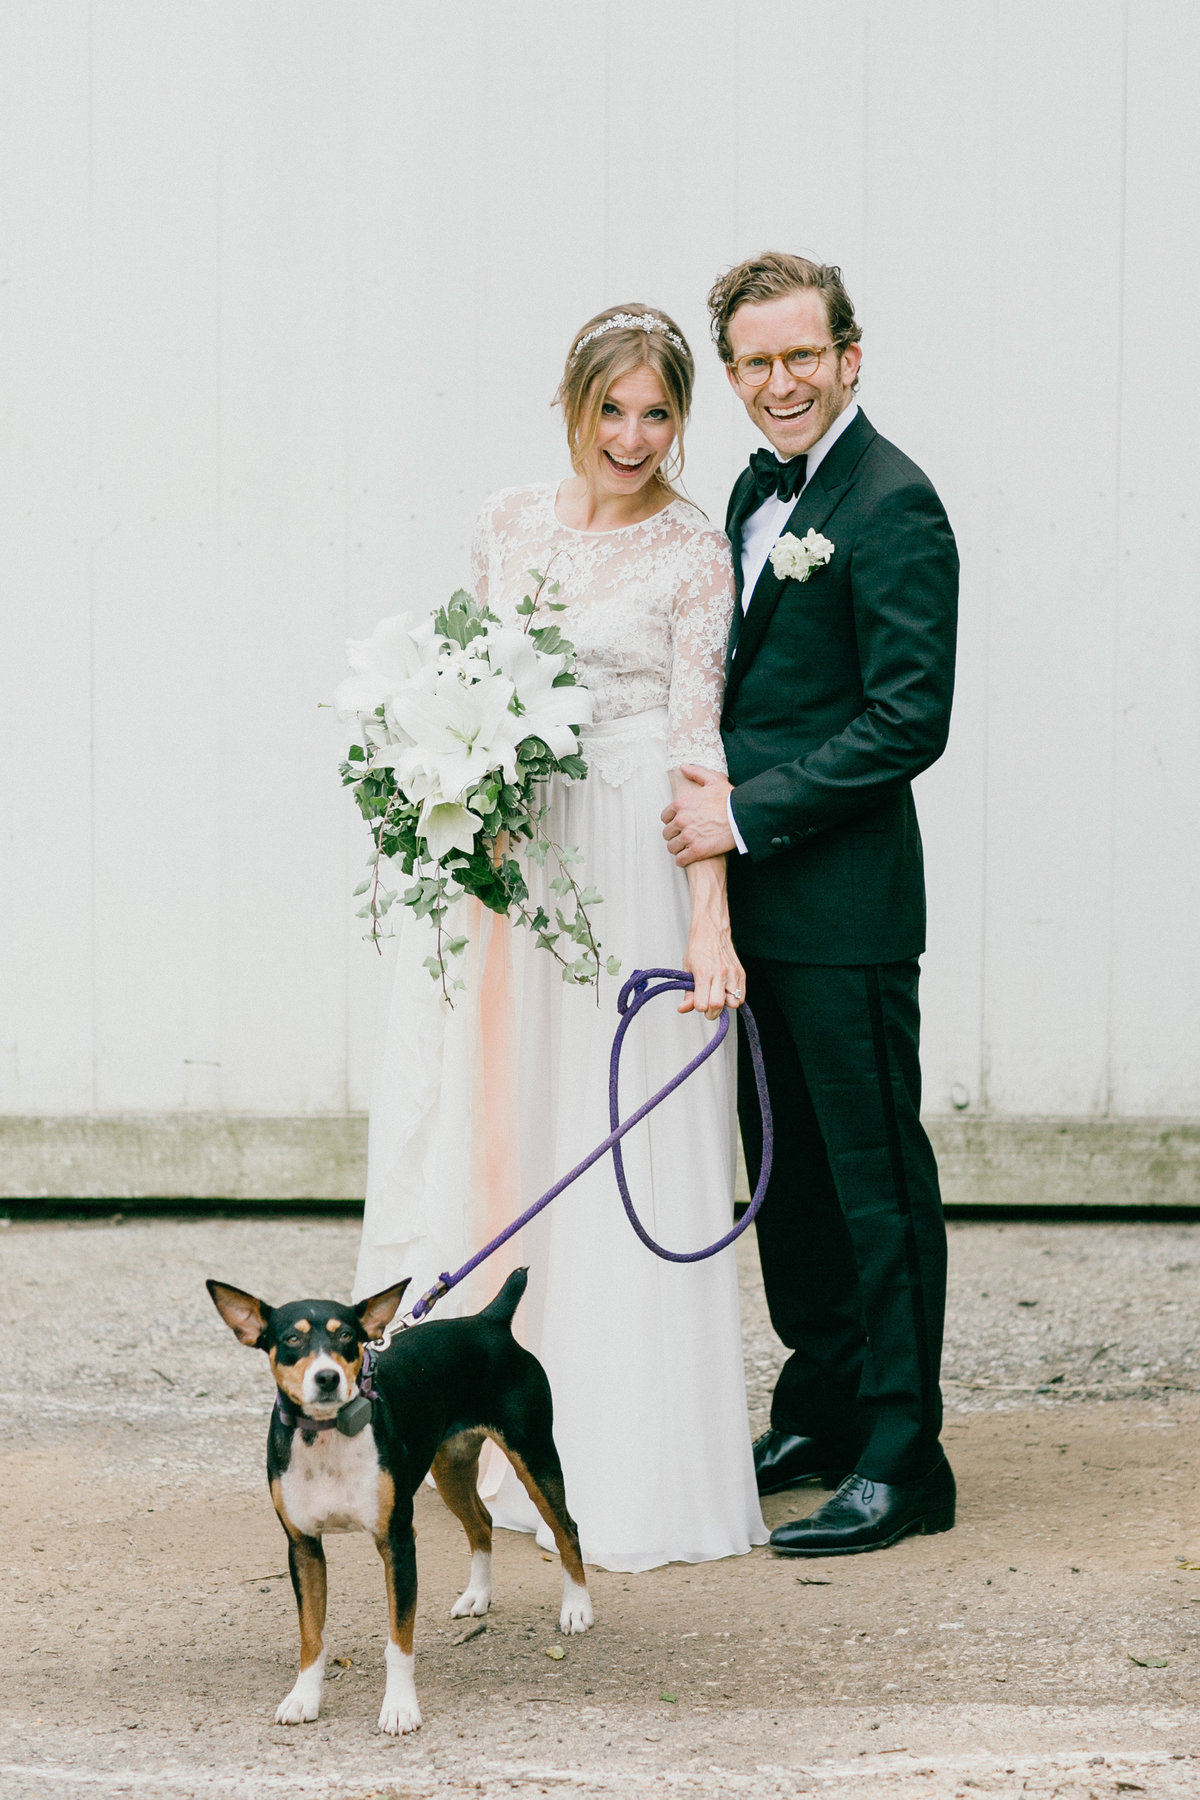 Family portrait of the bride, groom, and favorite furry friend.